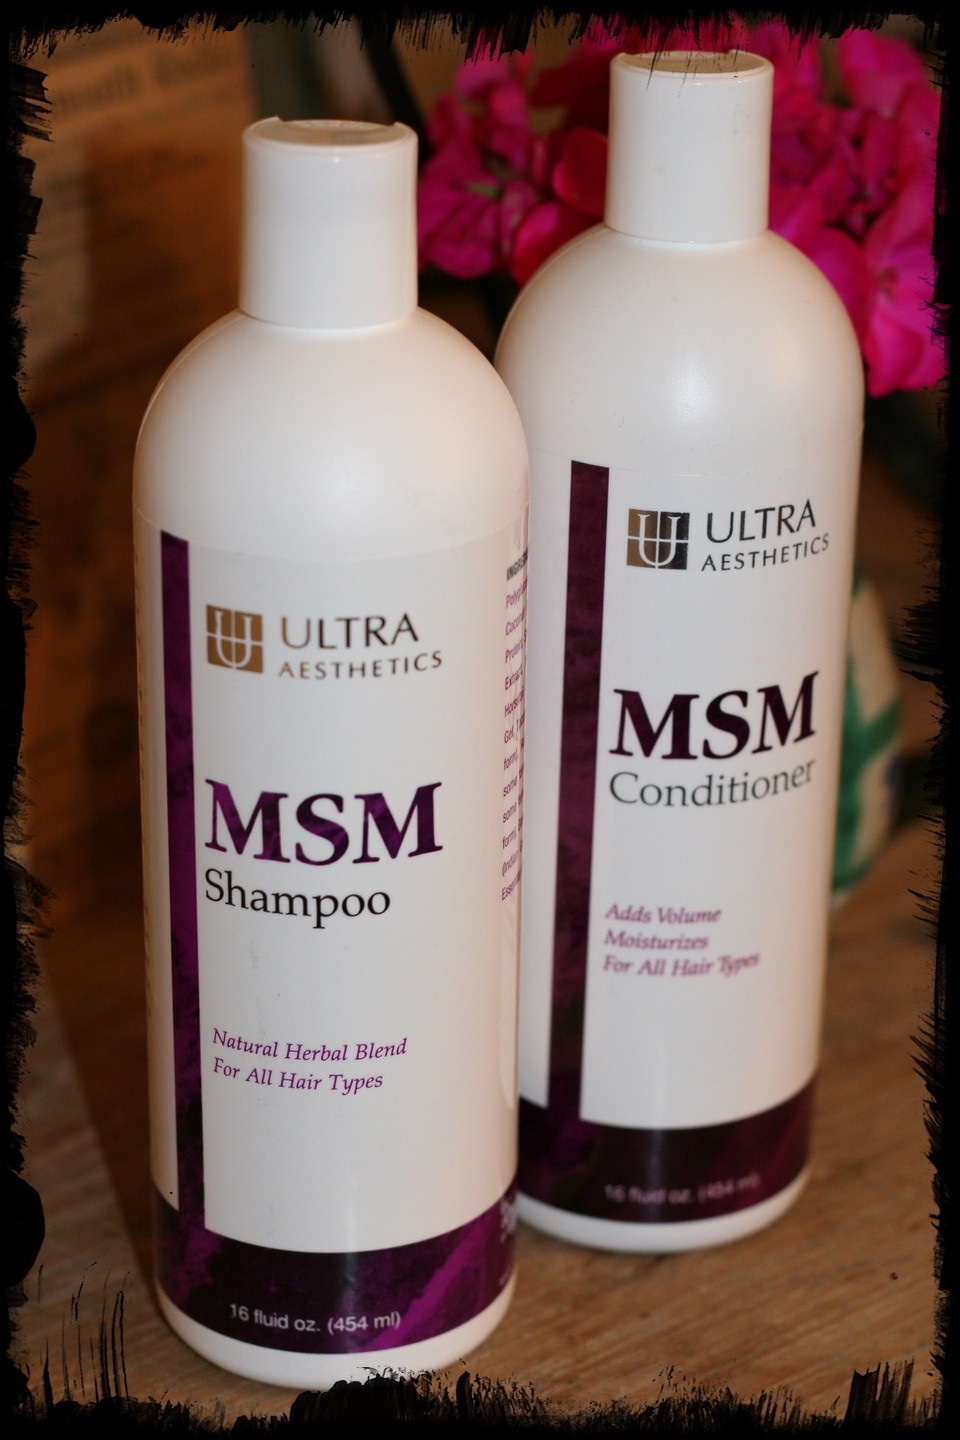 New Giveaway- MSM Shampoo and Conditioner